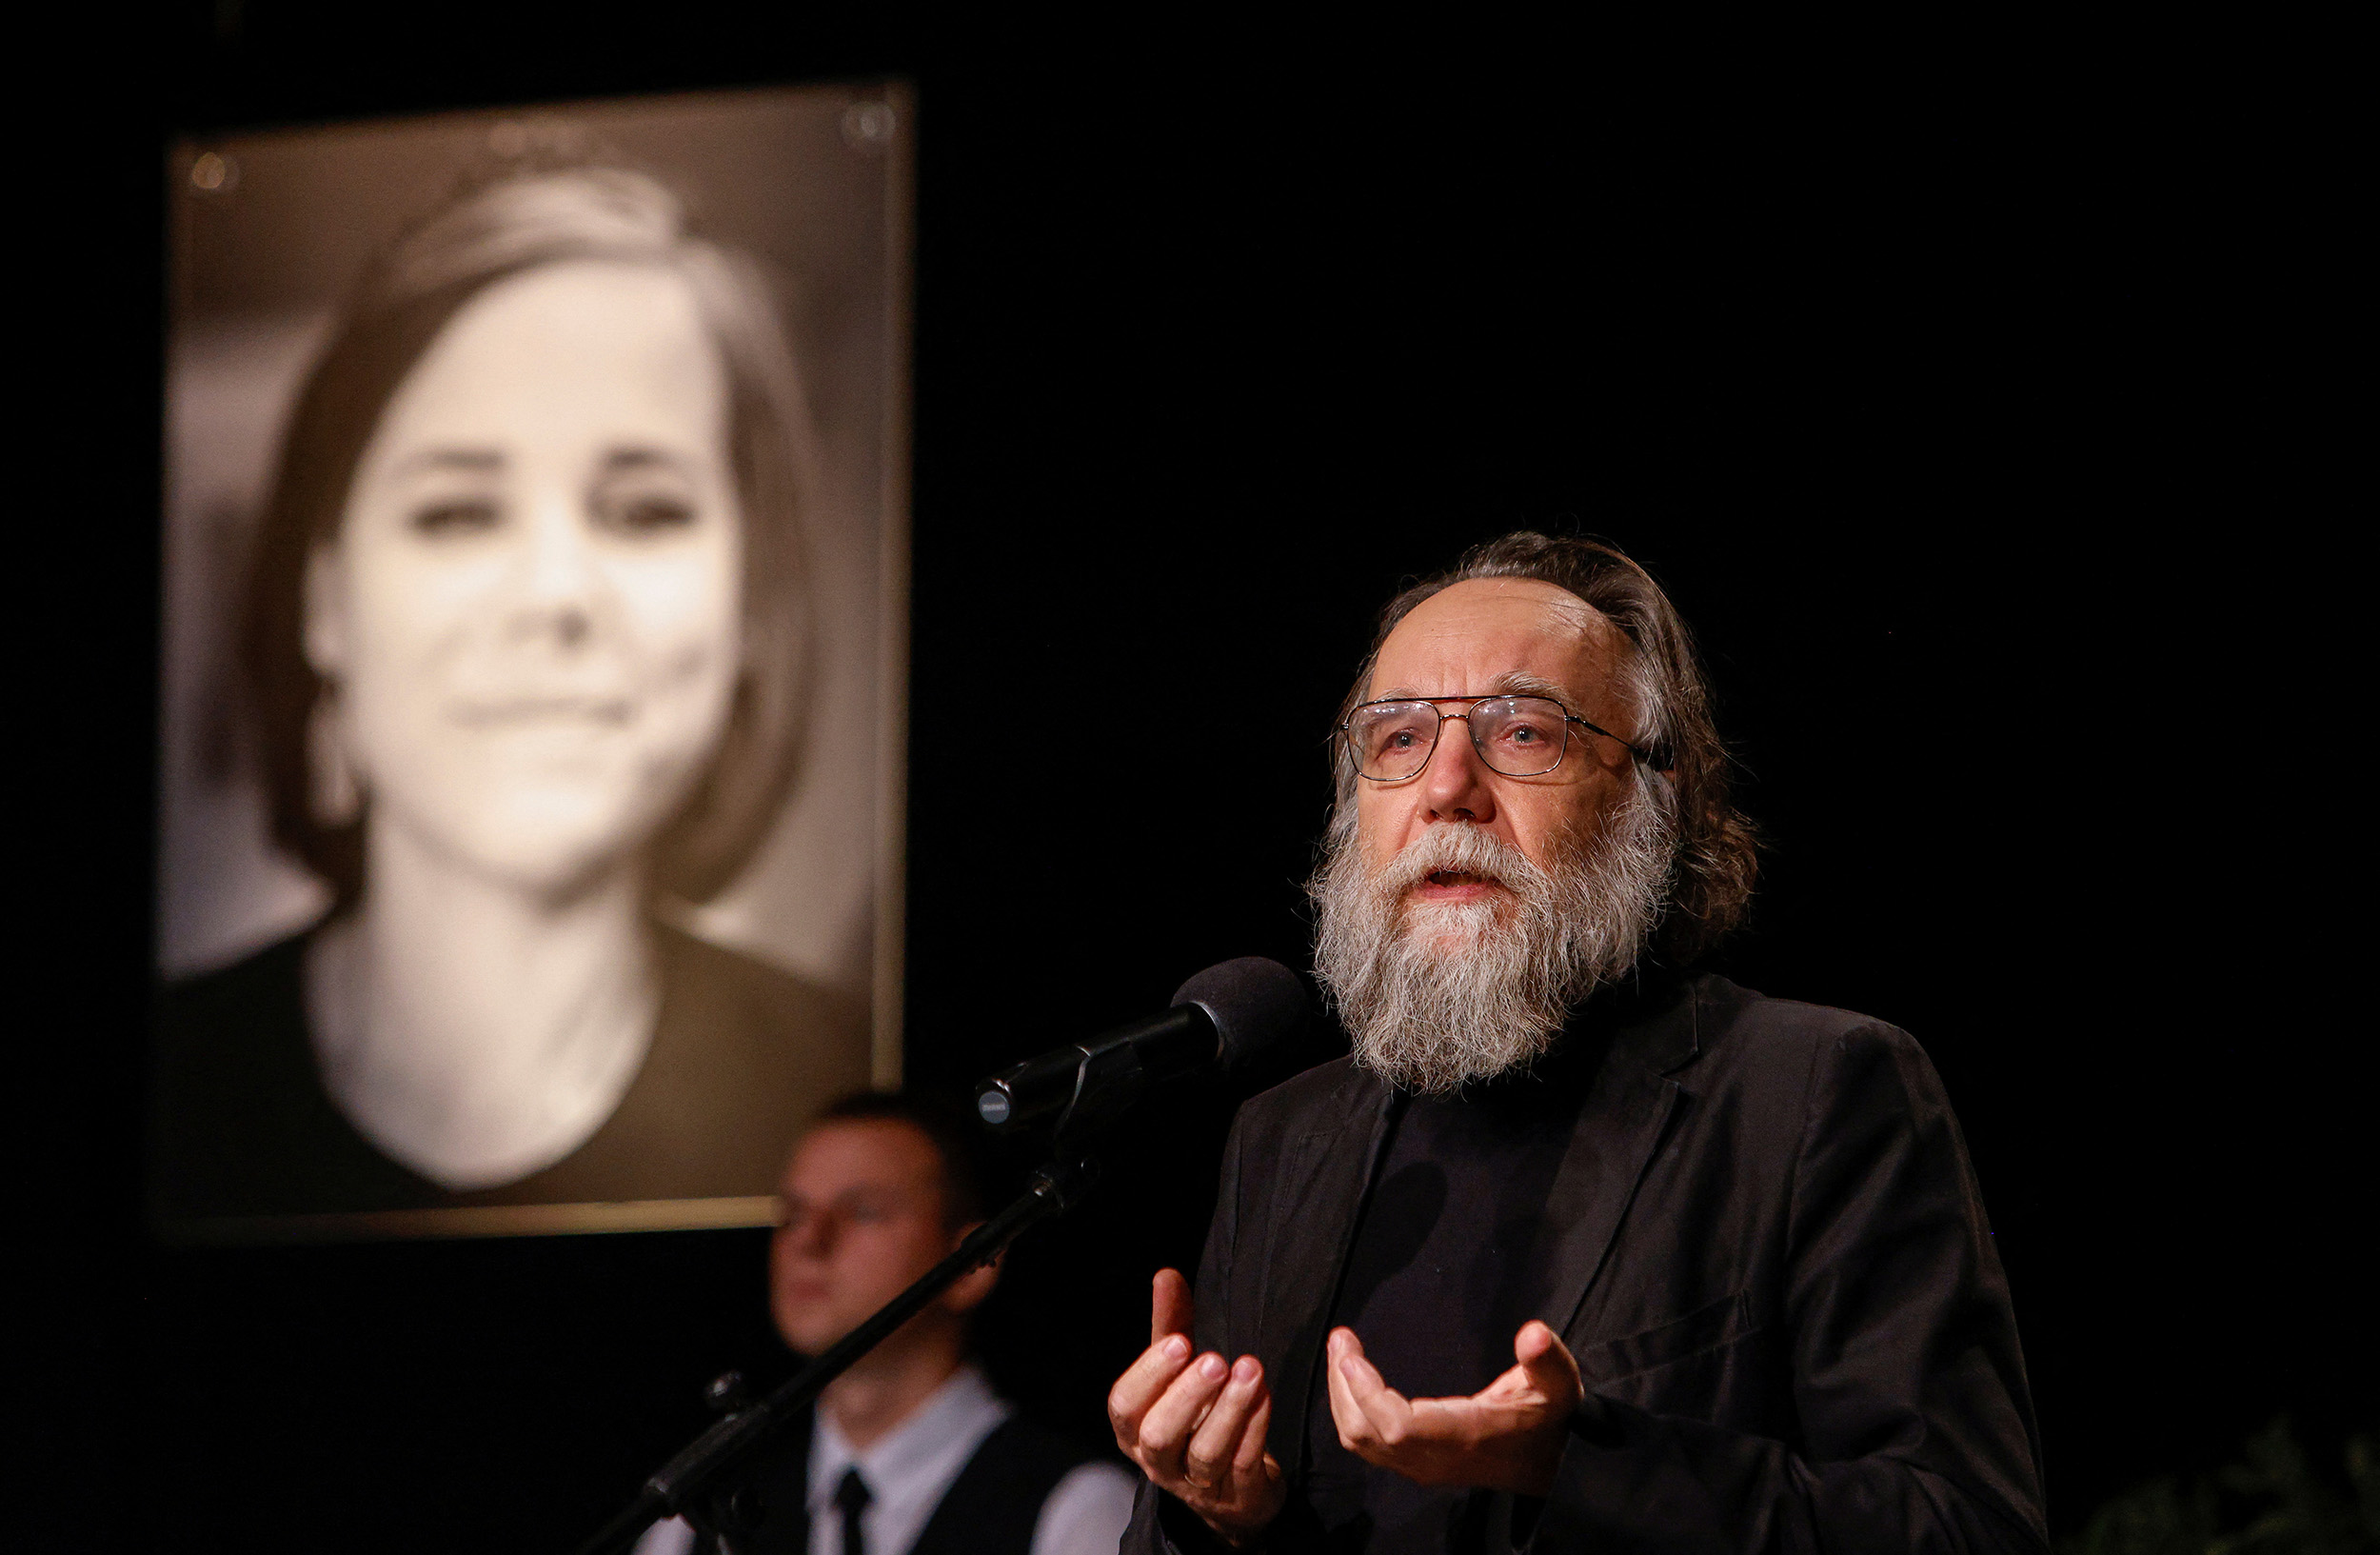 Russian political scientist and ideologue Alexander Dugin delivers a speech during a memorial service for his daughter Darya Dugina, in Moscow, Russia, on August 23.